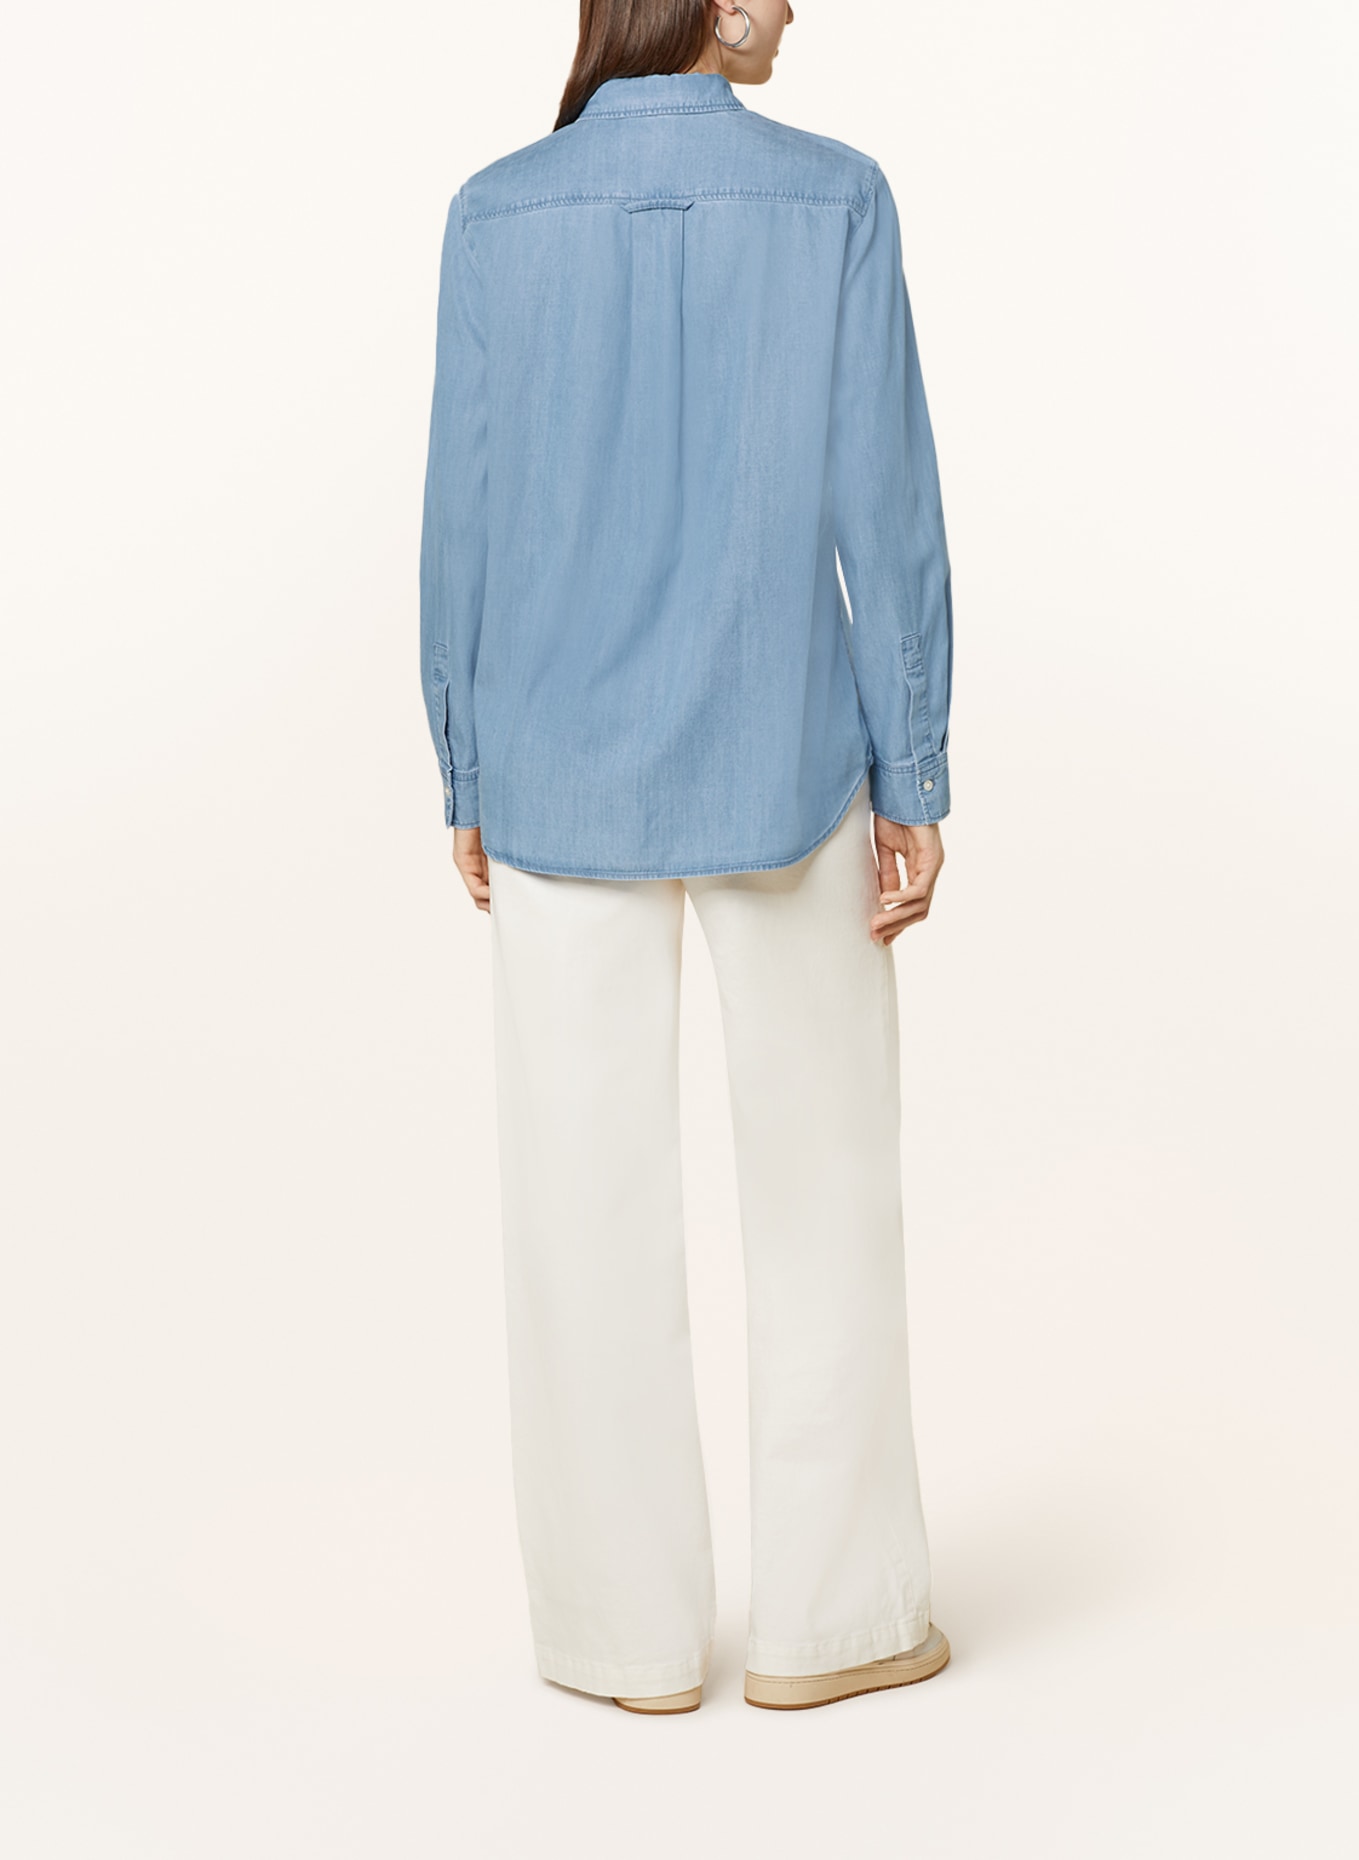 Marc O'Polo Shirt blouse in denim look, Color: LIGHT BLUE (Image 3)